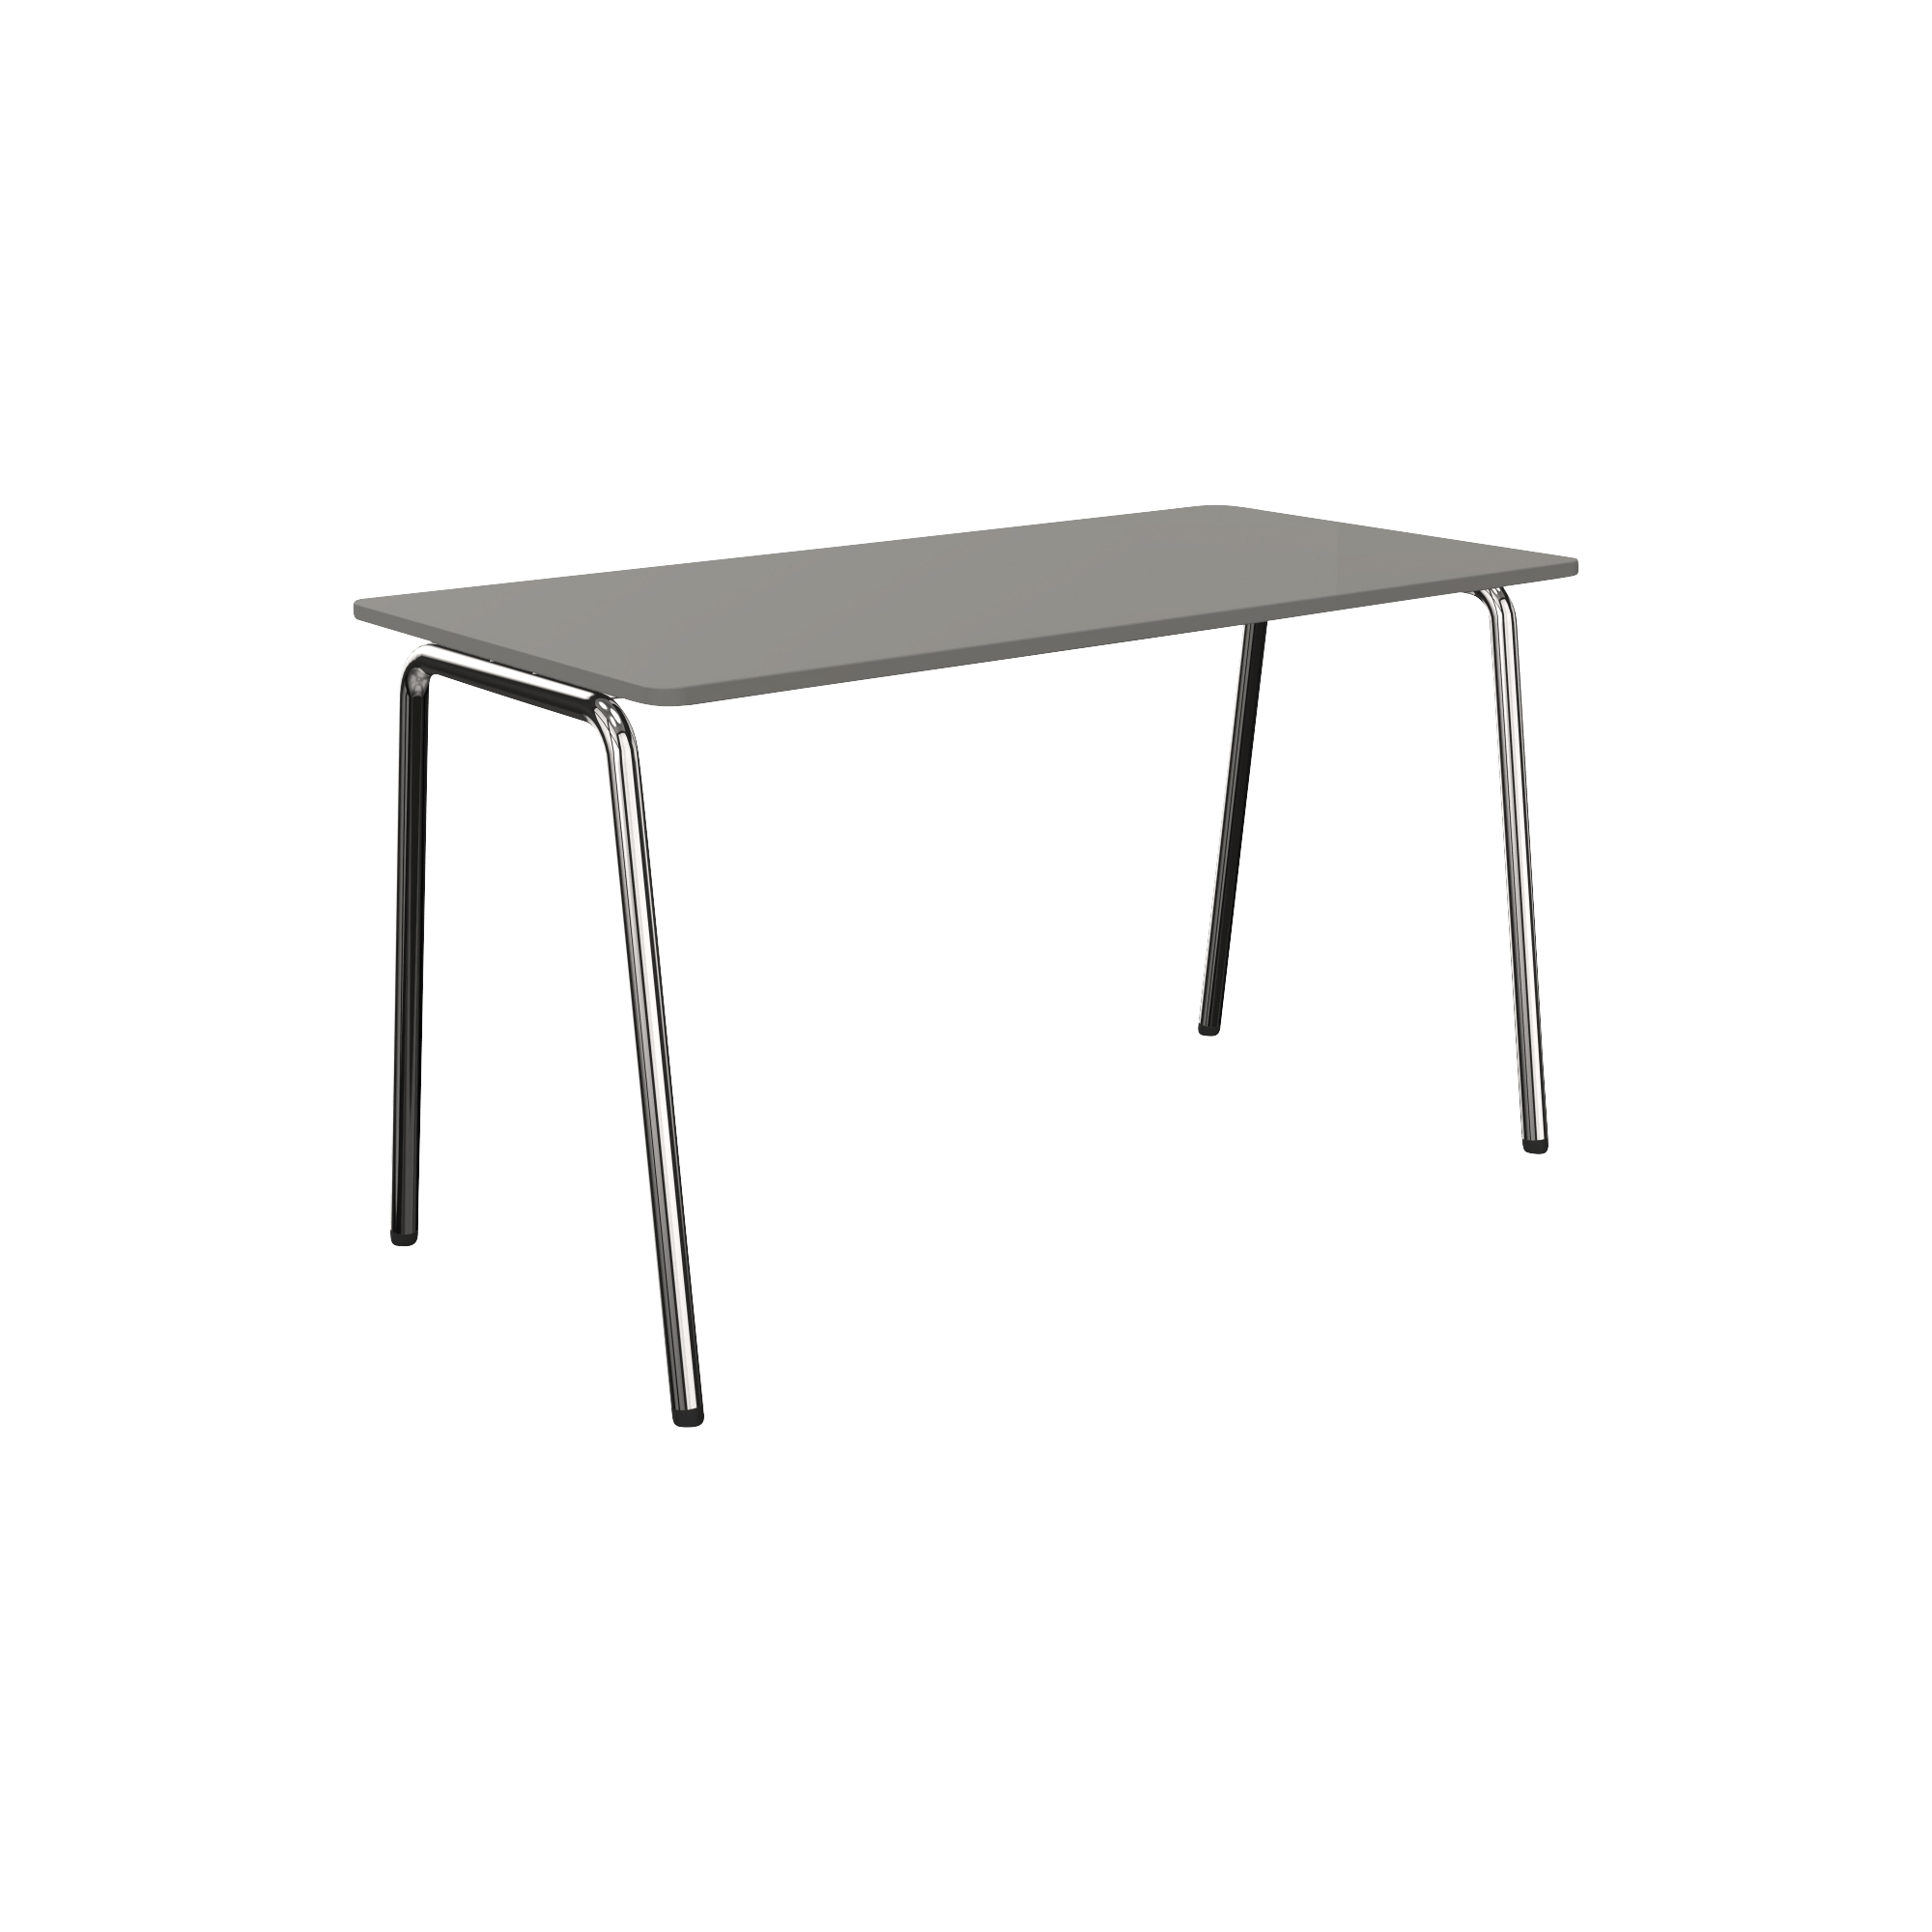 A grey table with a metal frame